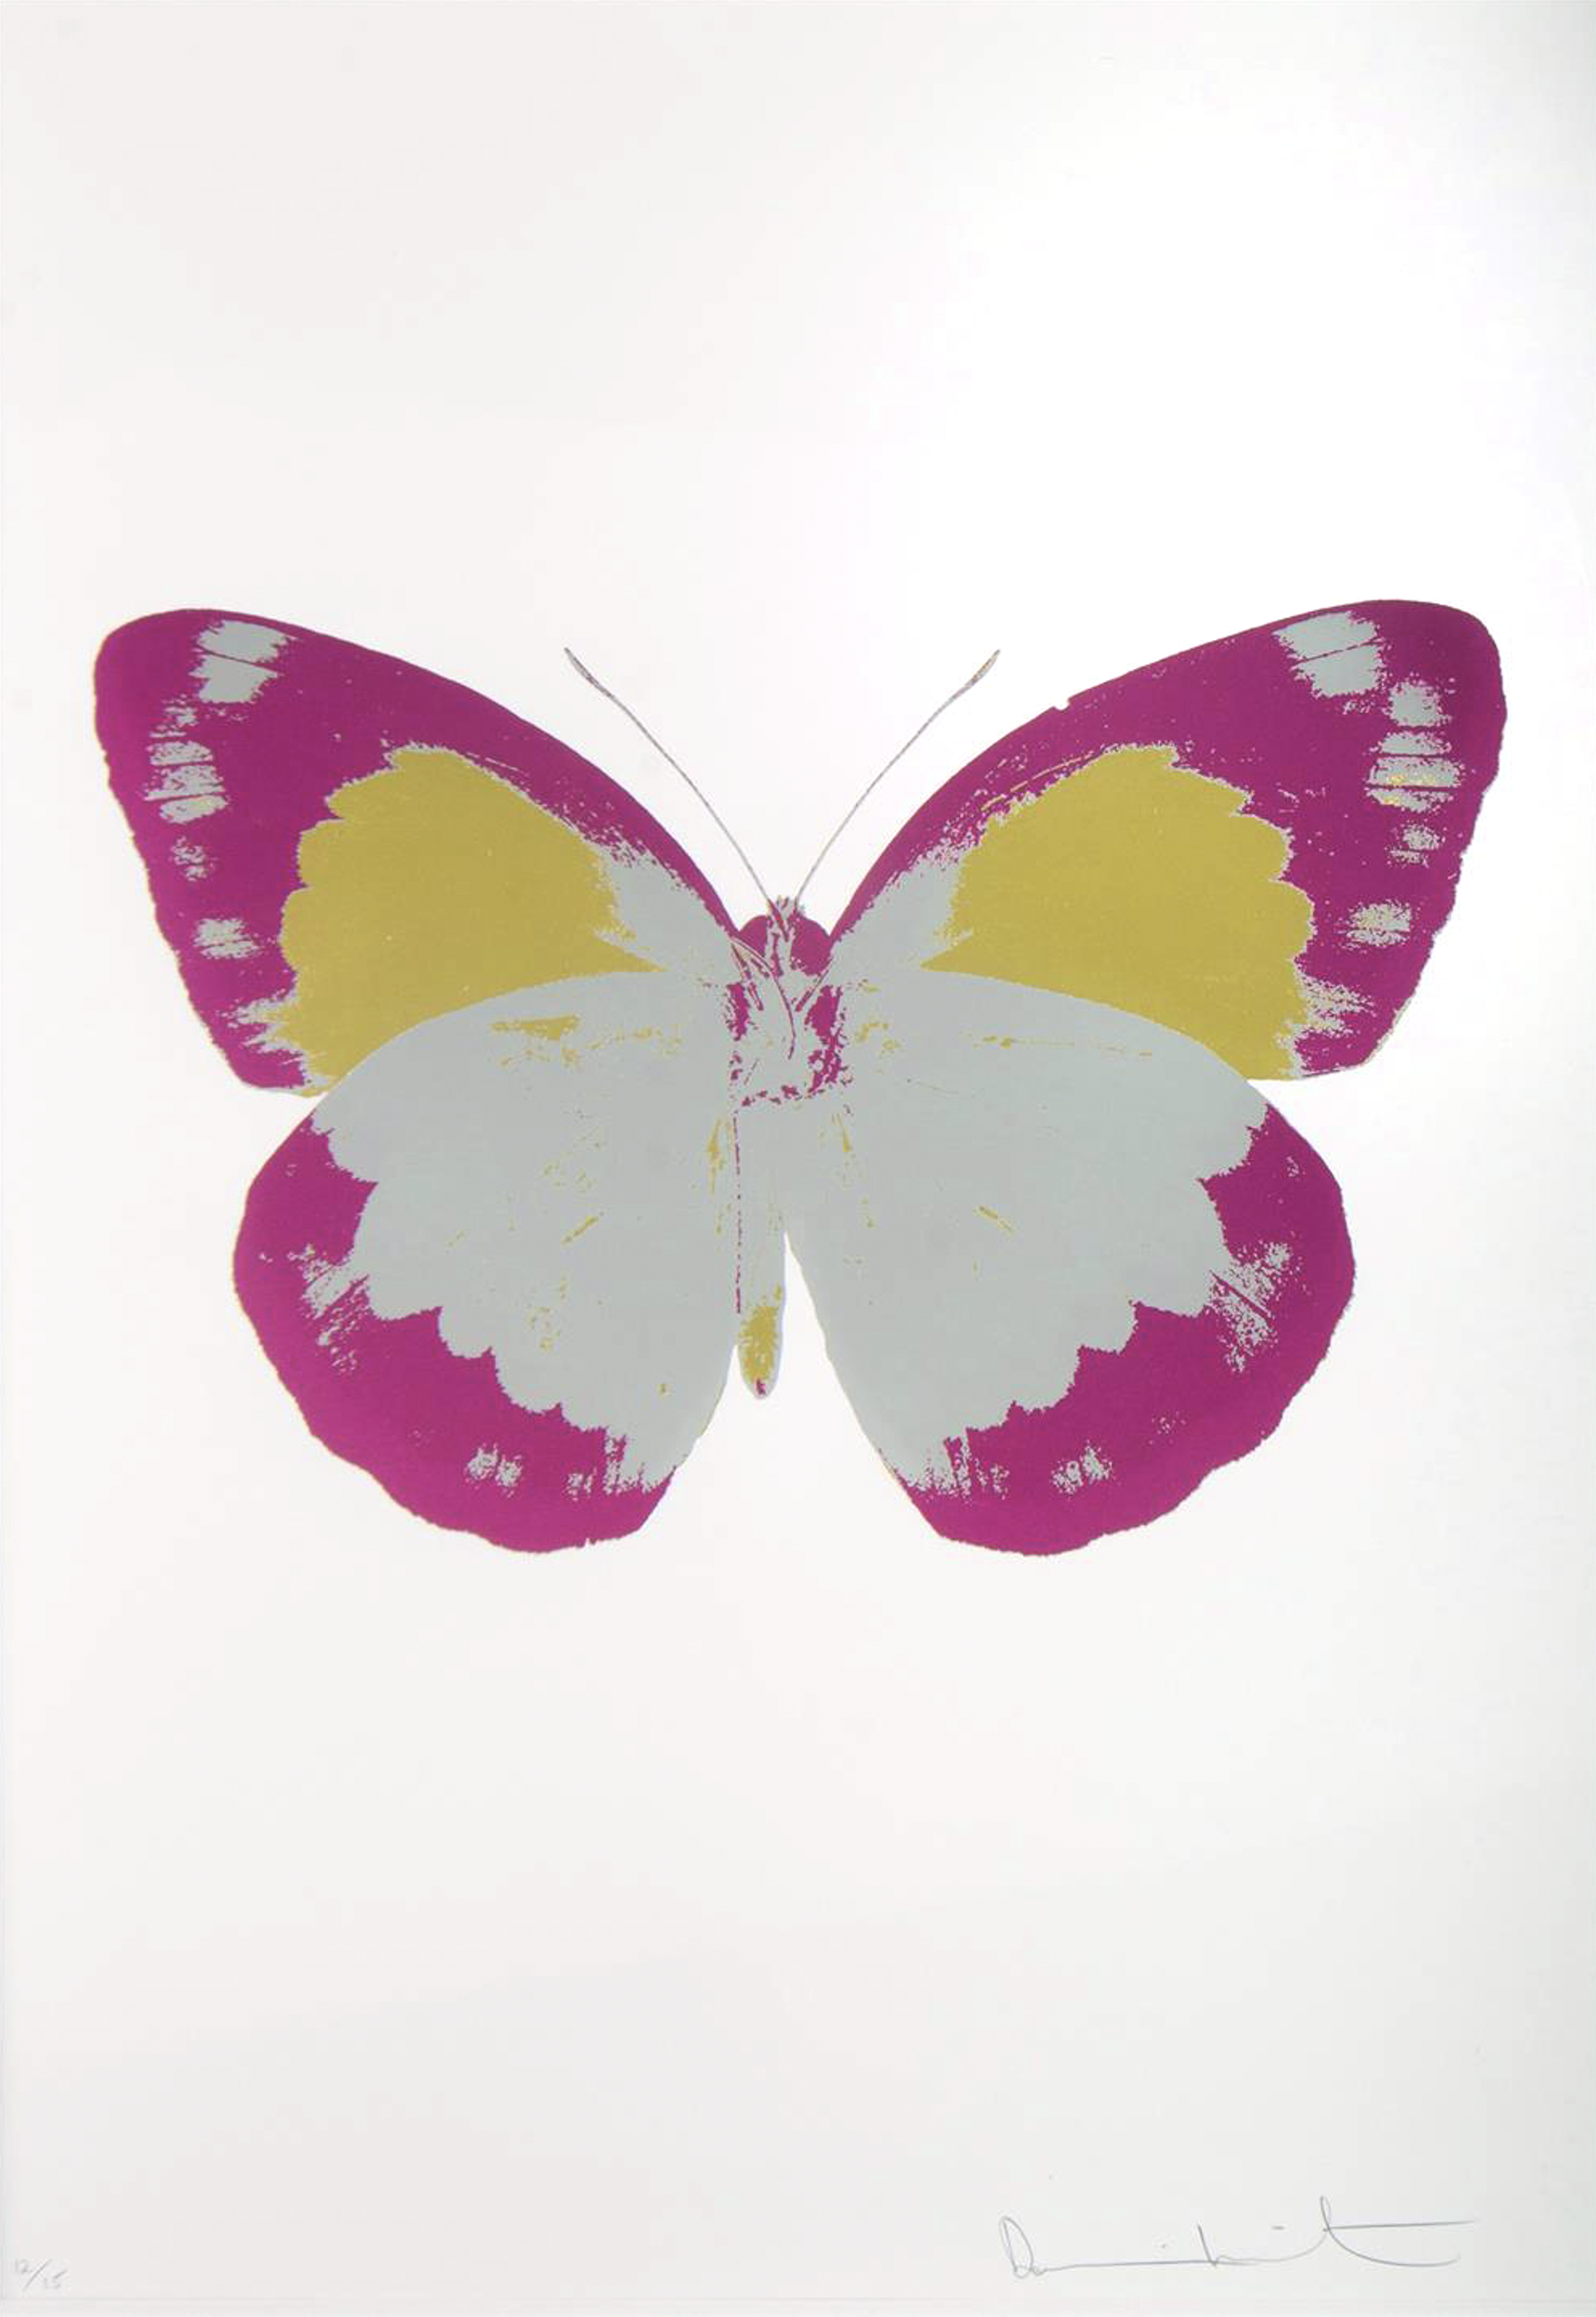 The Souls II (Silver Gloss, Fuchsia Pink, Oriental Gold) by Damien Hirst